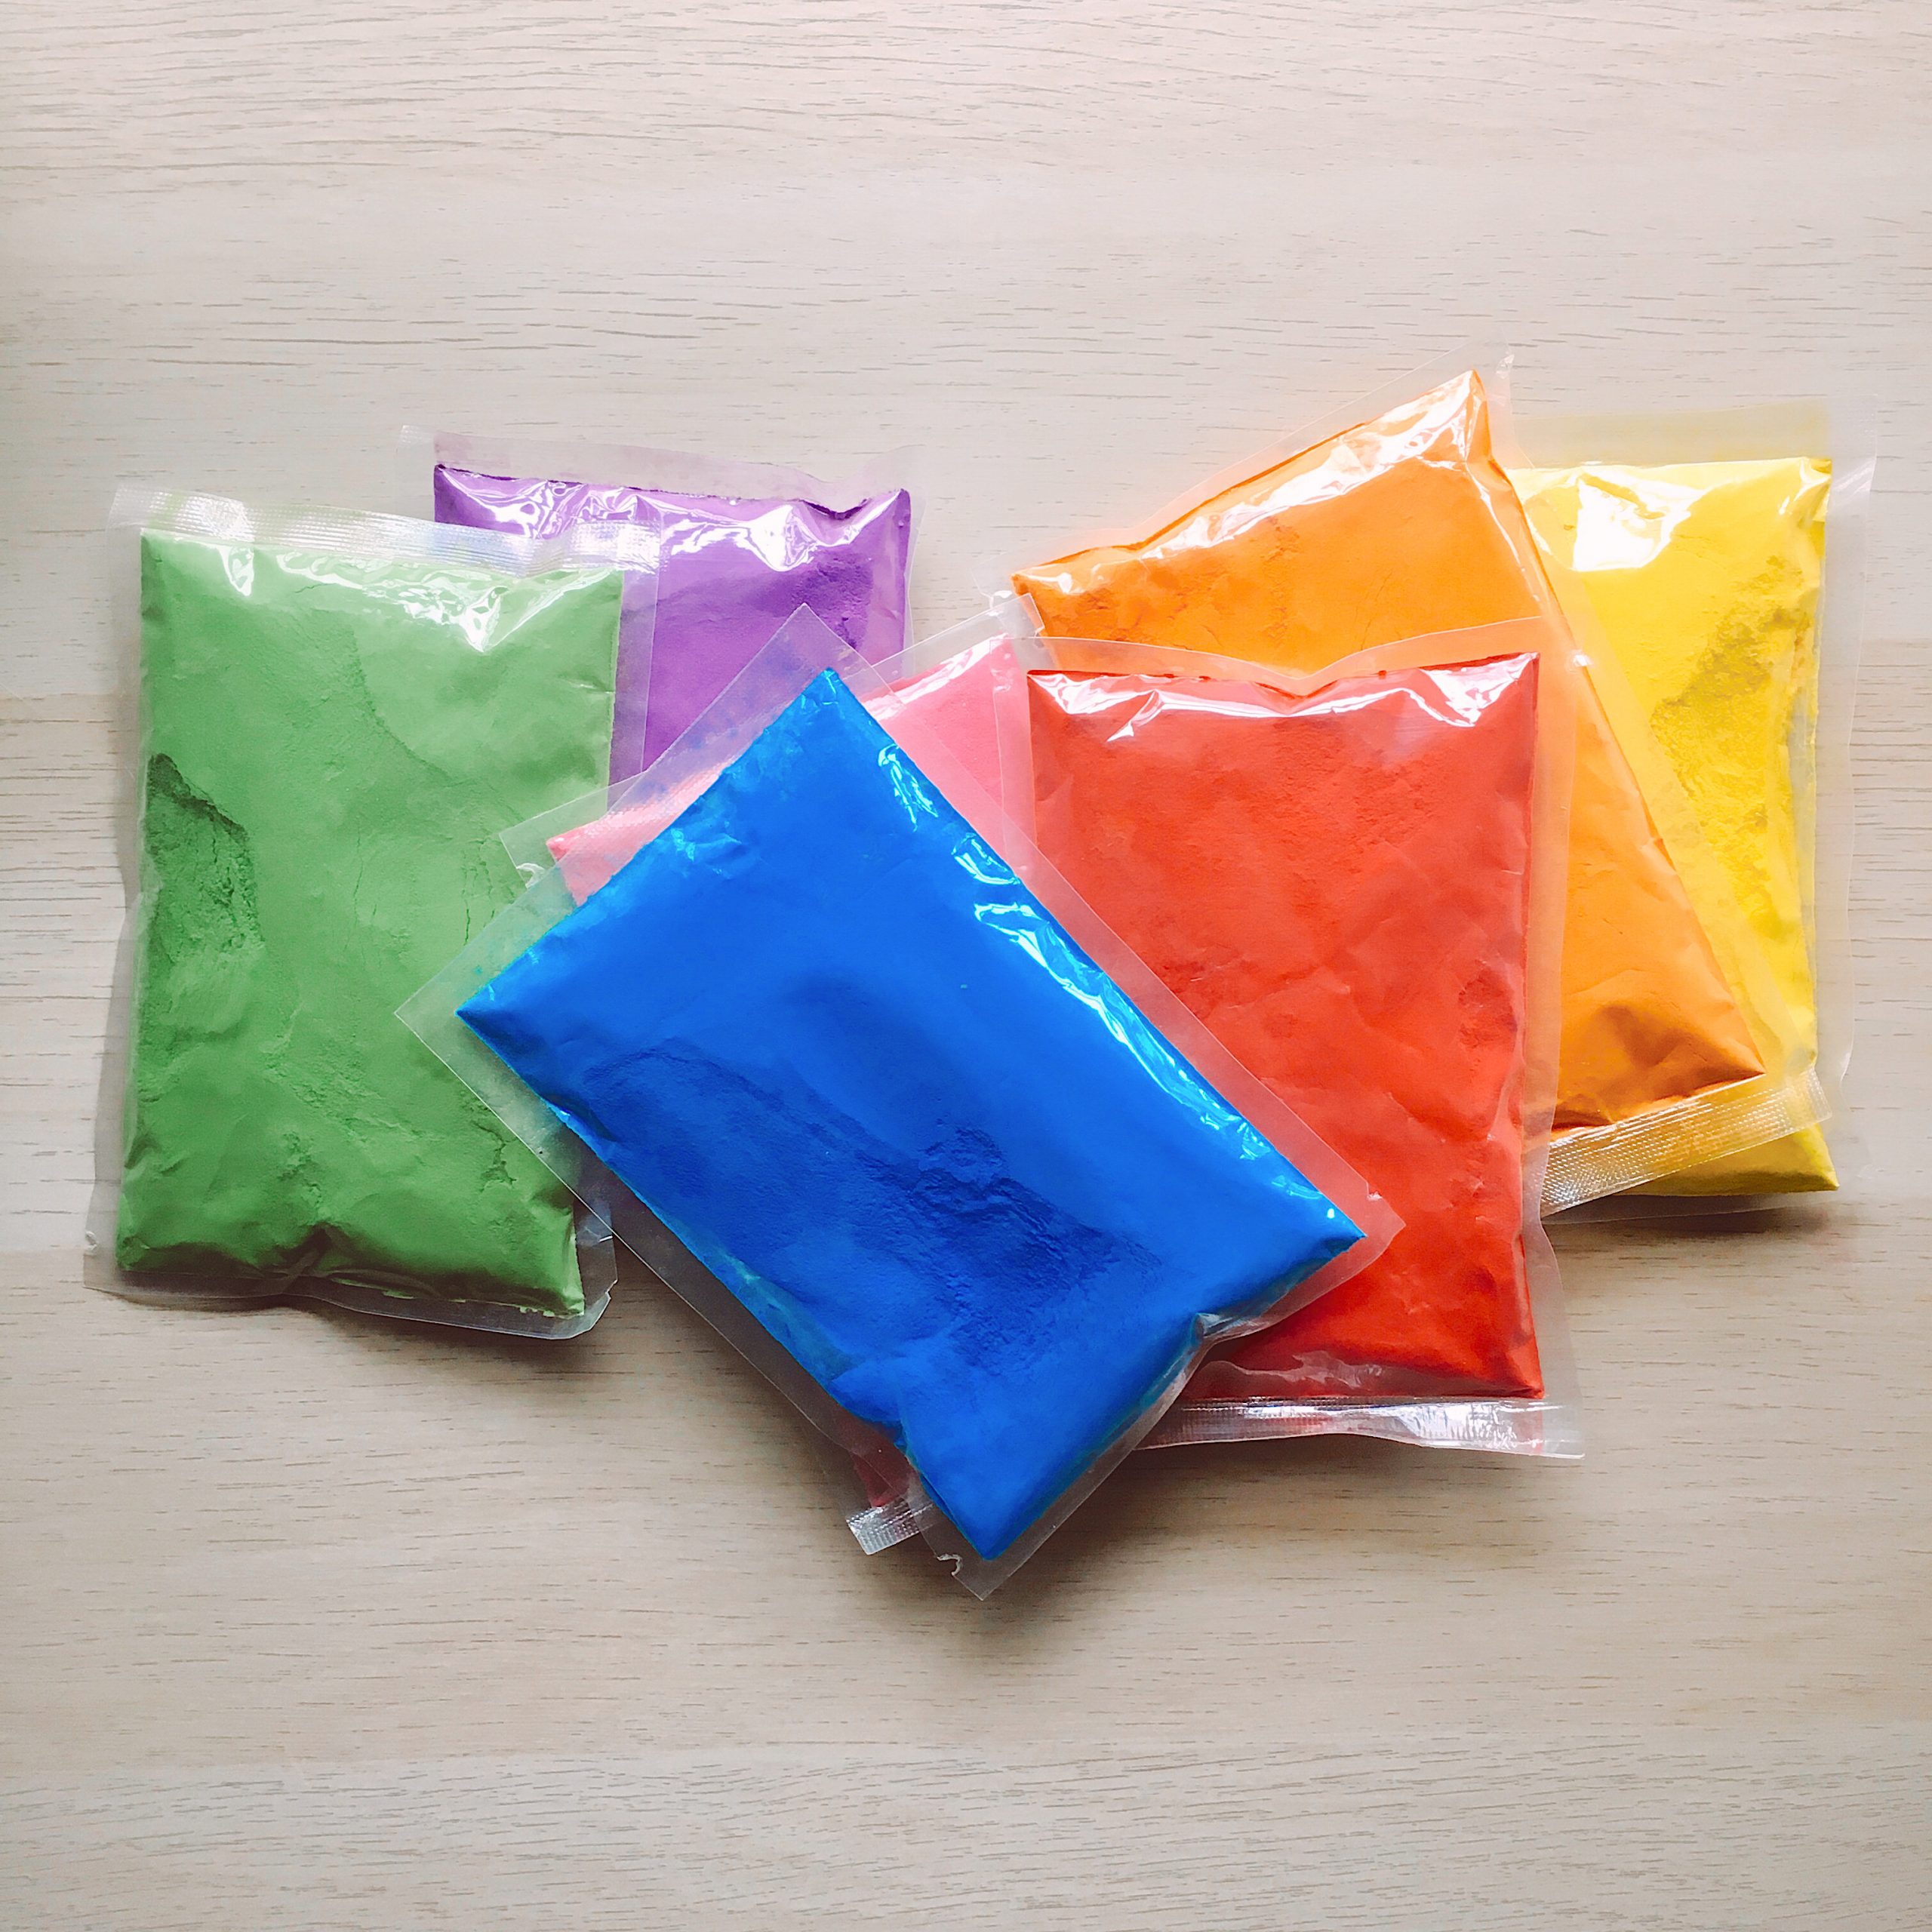 250 Count) Color Powder Packets - Assorted Colors - Color Powder Supply - Bulk Holi Powder